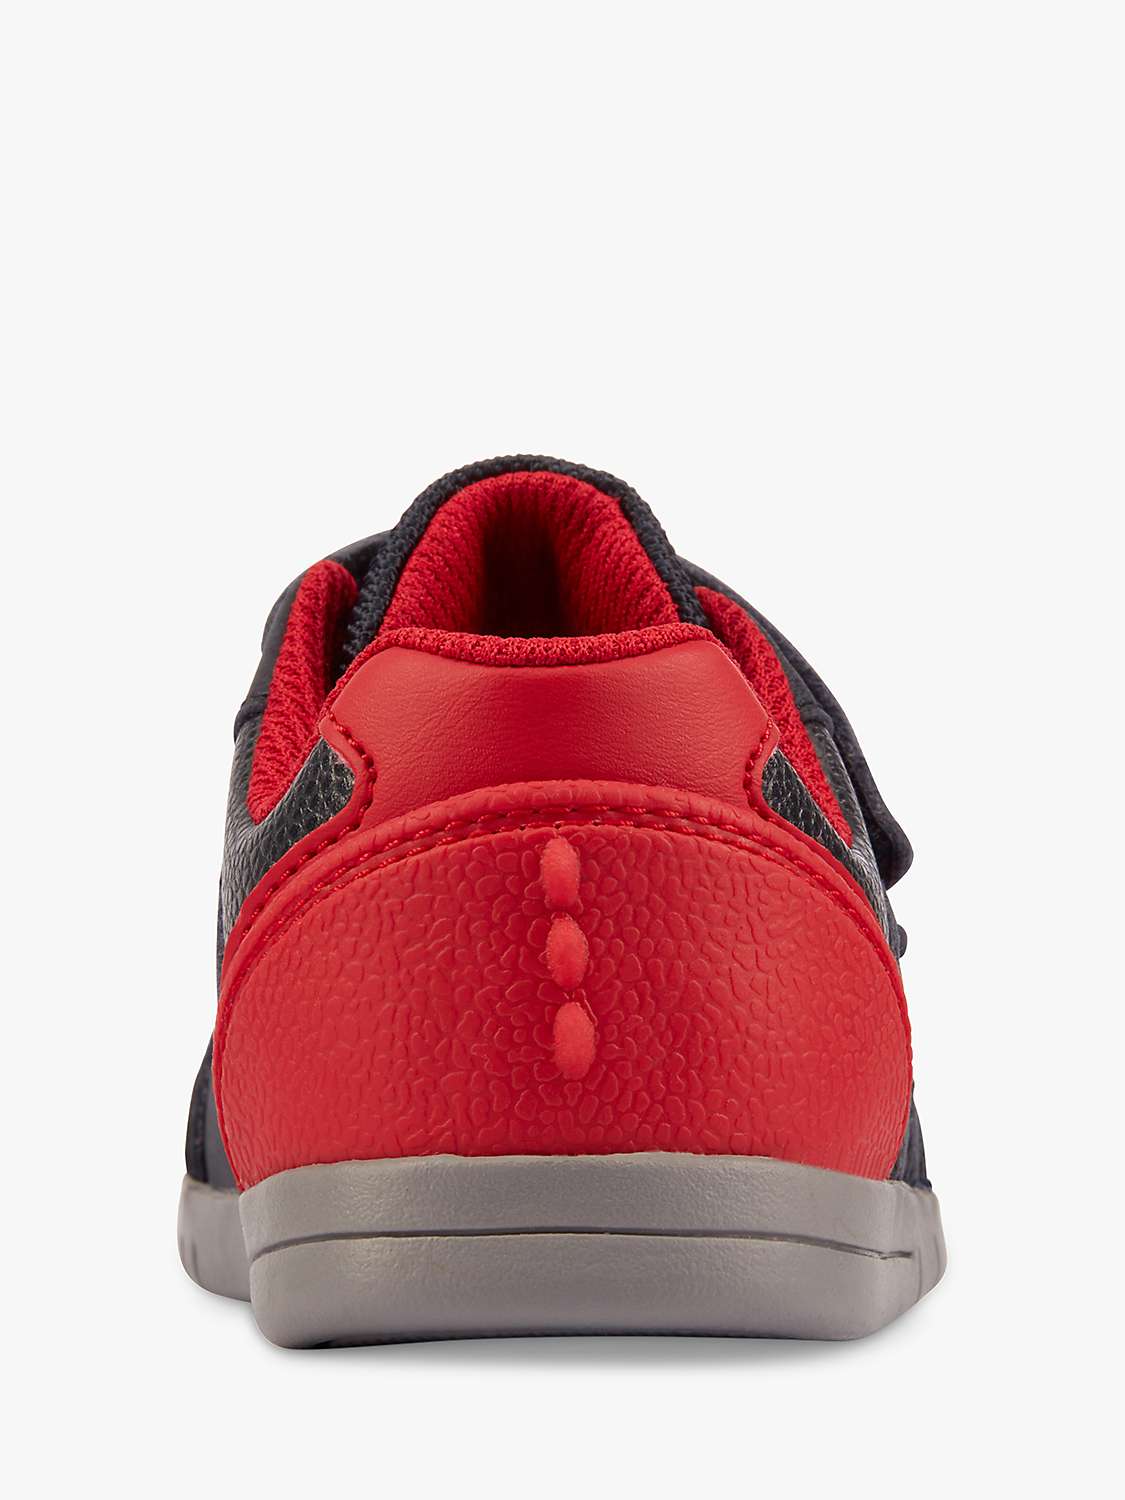 Buy Clarks Kids' Rex Play Trainers Online at johnlewis.com